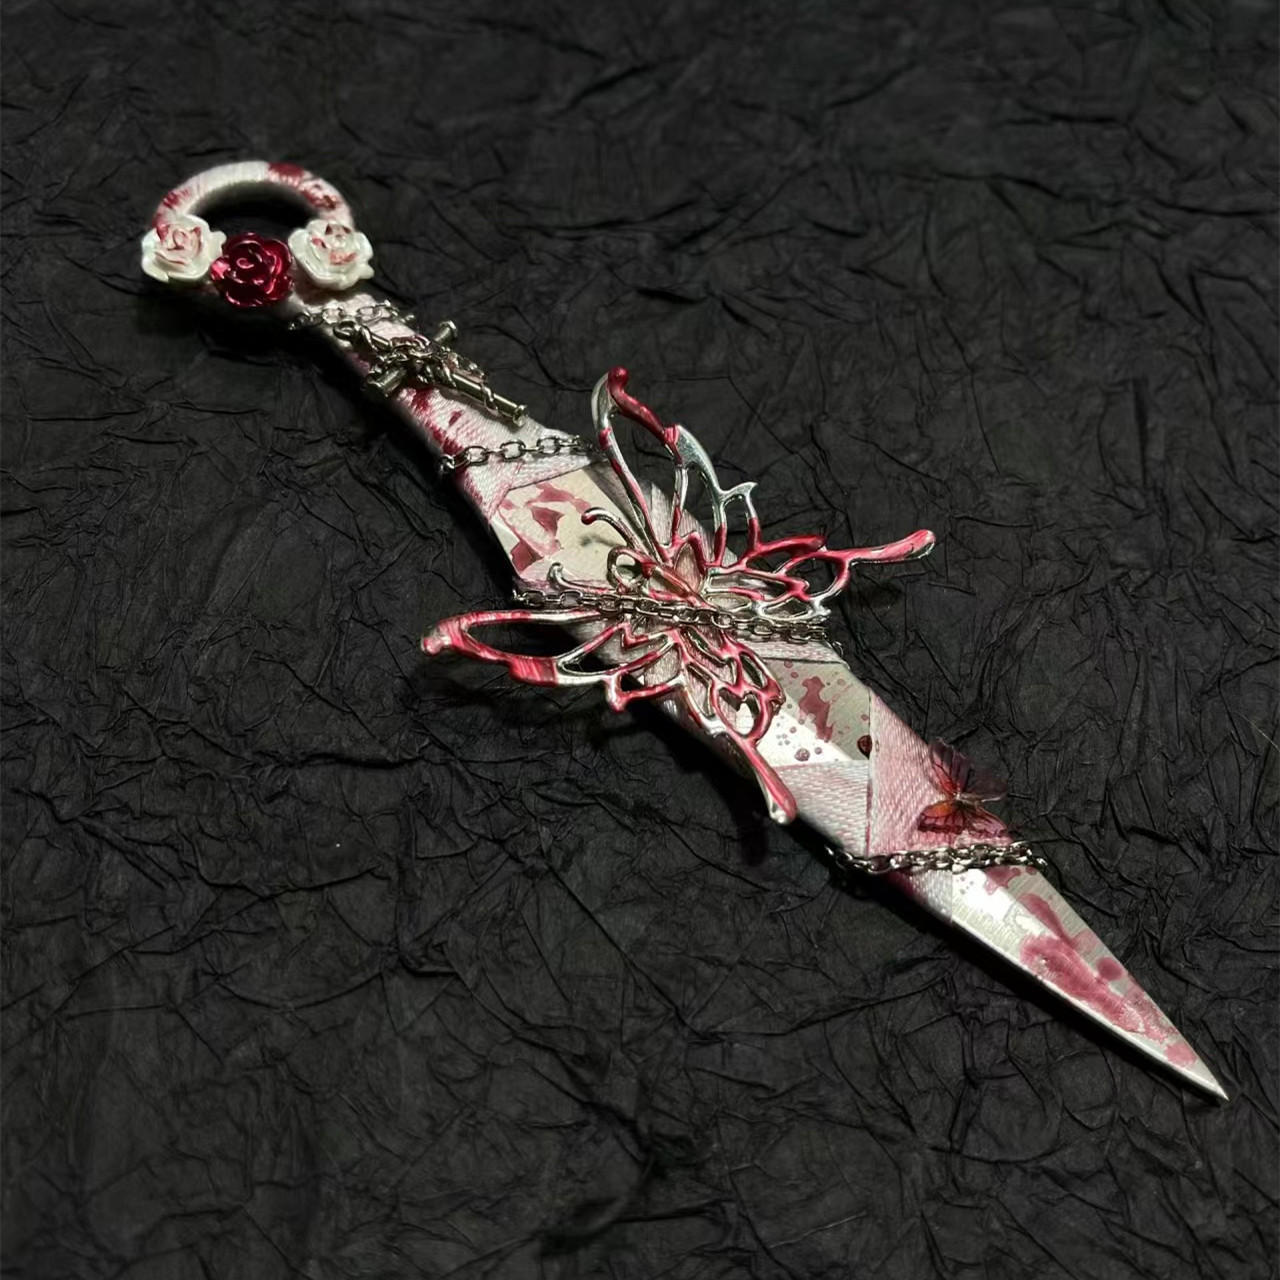 Bloody Butterfly Metal Blunt Blade Kunai Unboxing Tool Room Decor